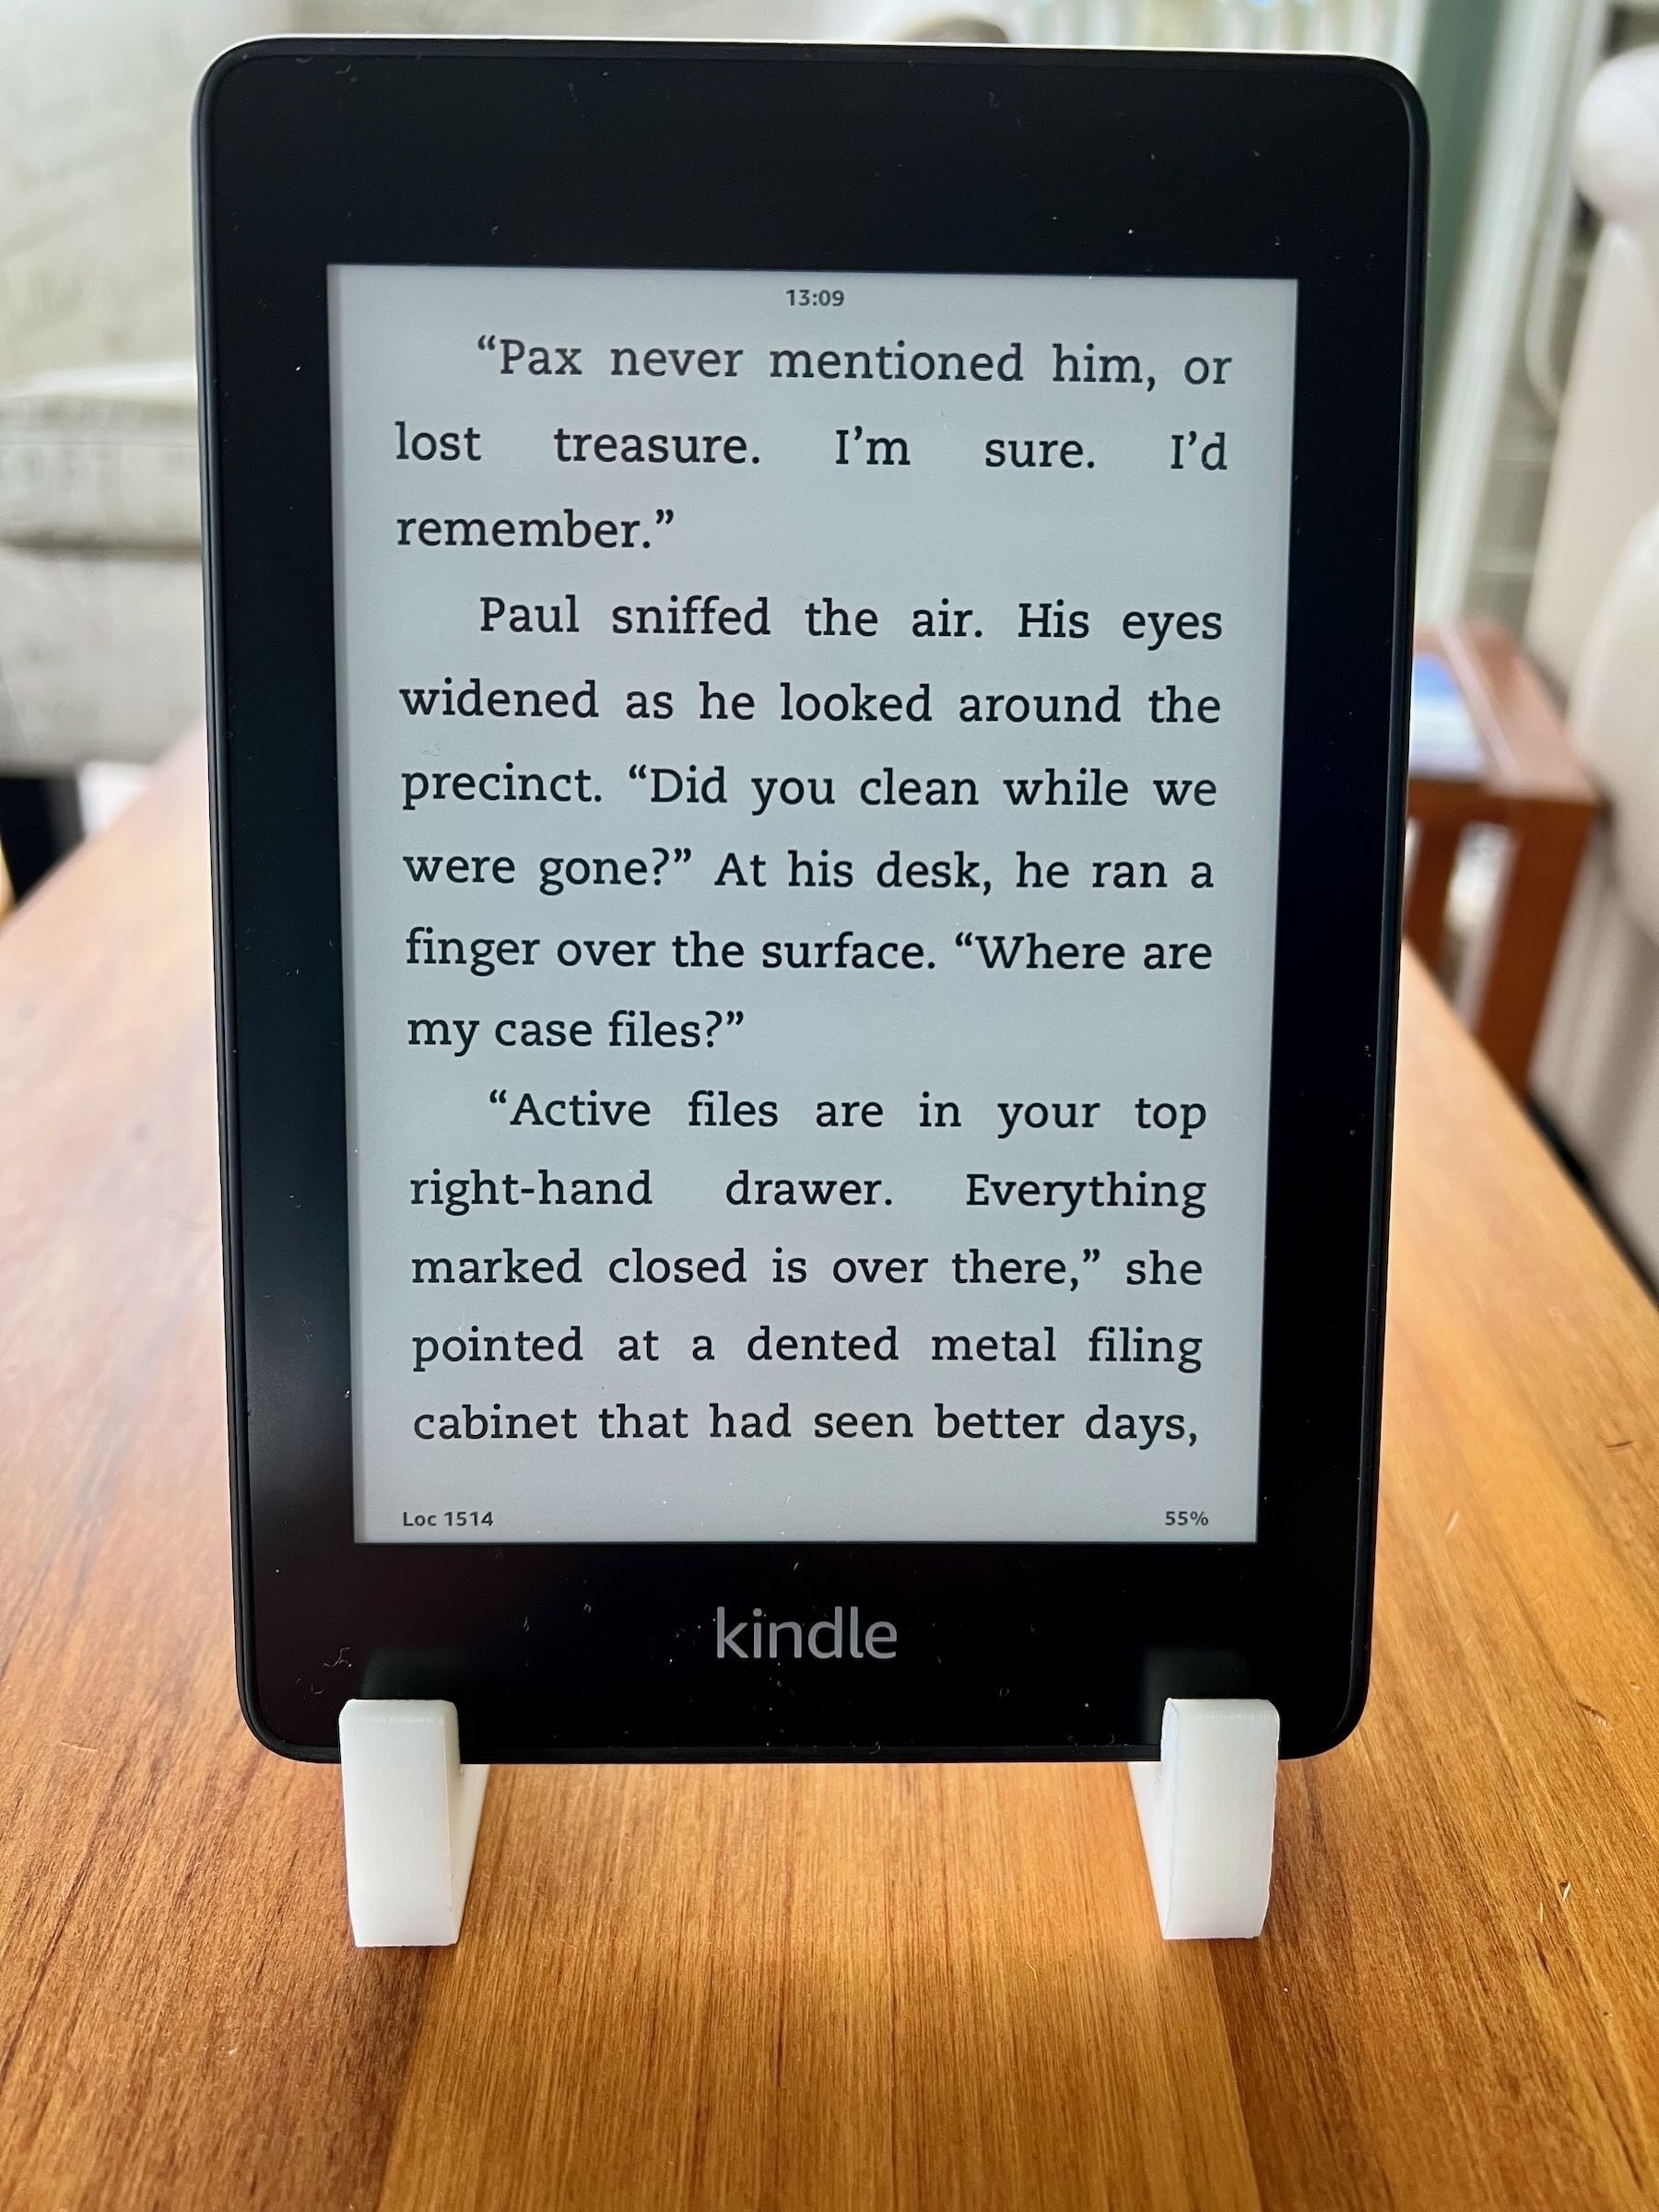 3D printed Kindle stand with Kindle, screen shows a page from @Cheri new book.   